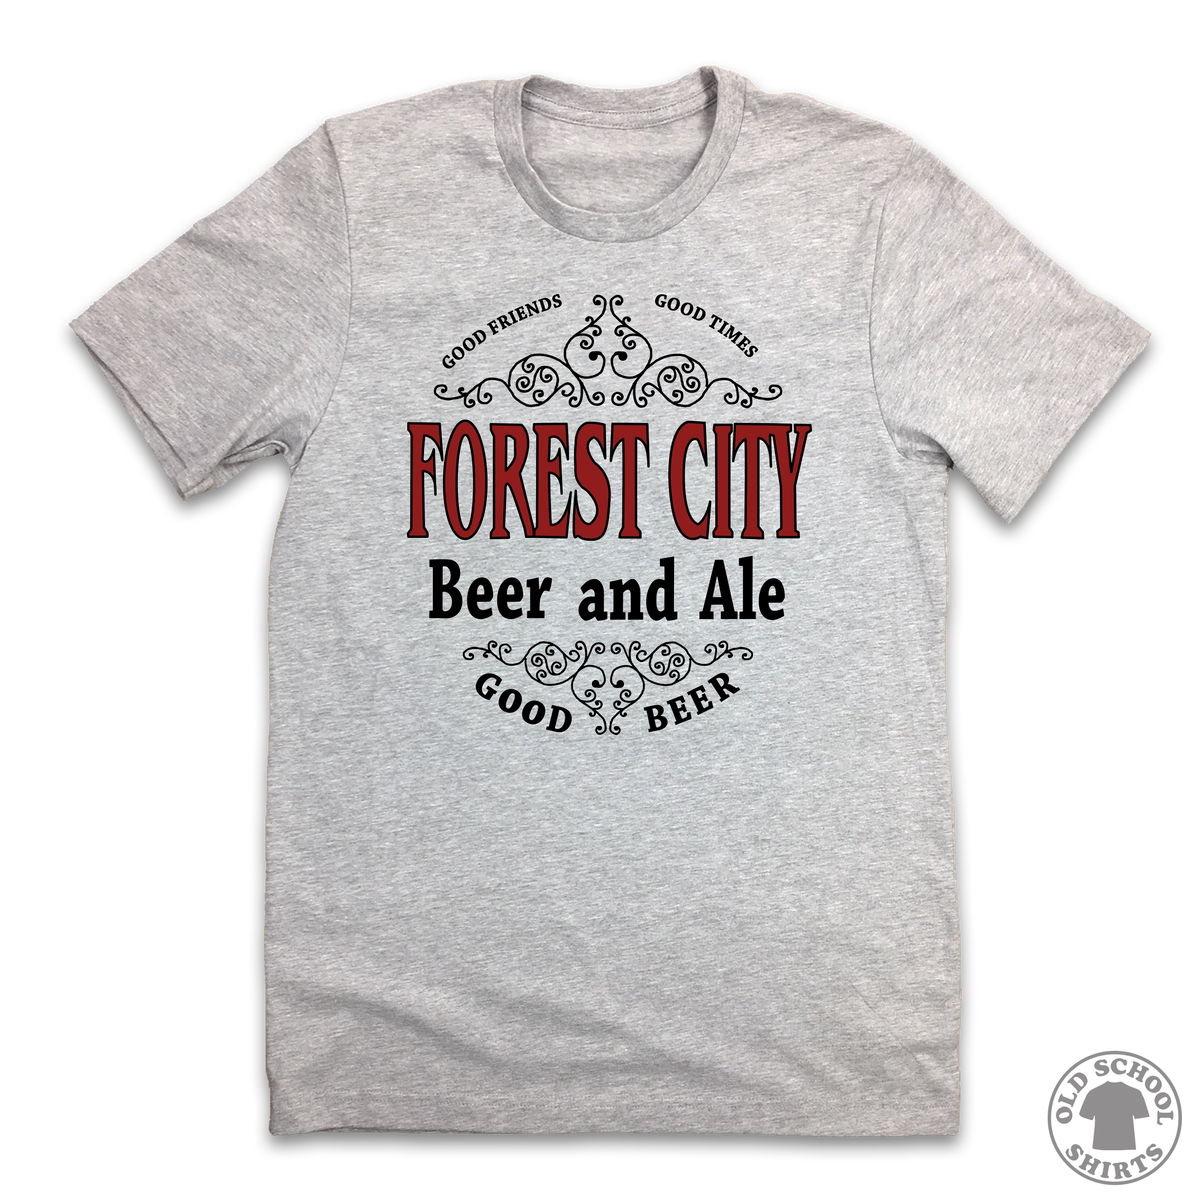 Forest City Ale and Beer - Old School Shirts- Retro Sports T Shirts